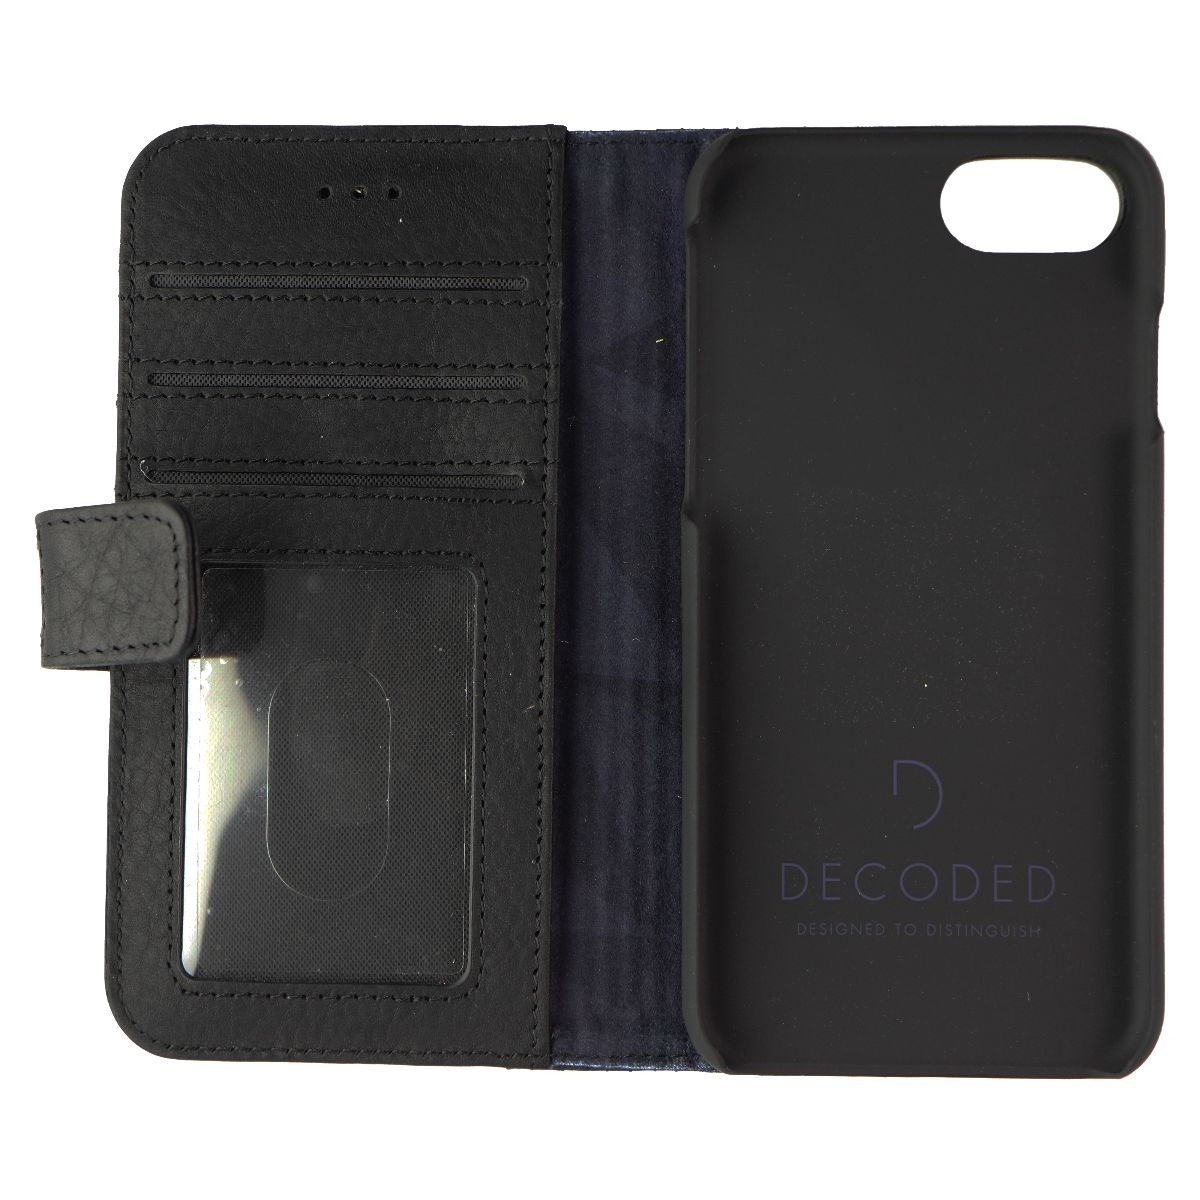 DECODED Full Grain Leather 2-in-1 Wallet For IPhone 8/7/6s/6 - Rough Black (Refurbished)